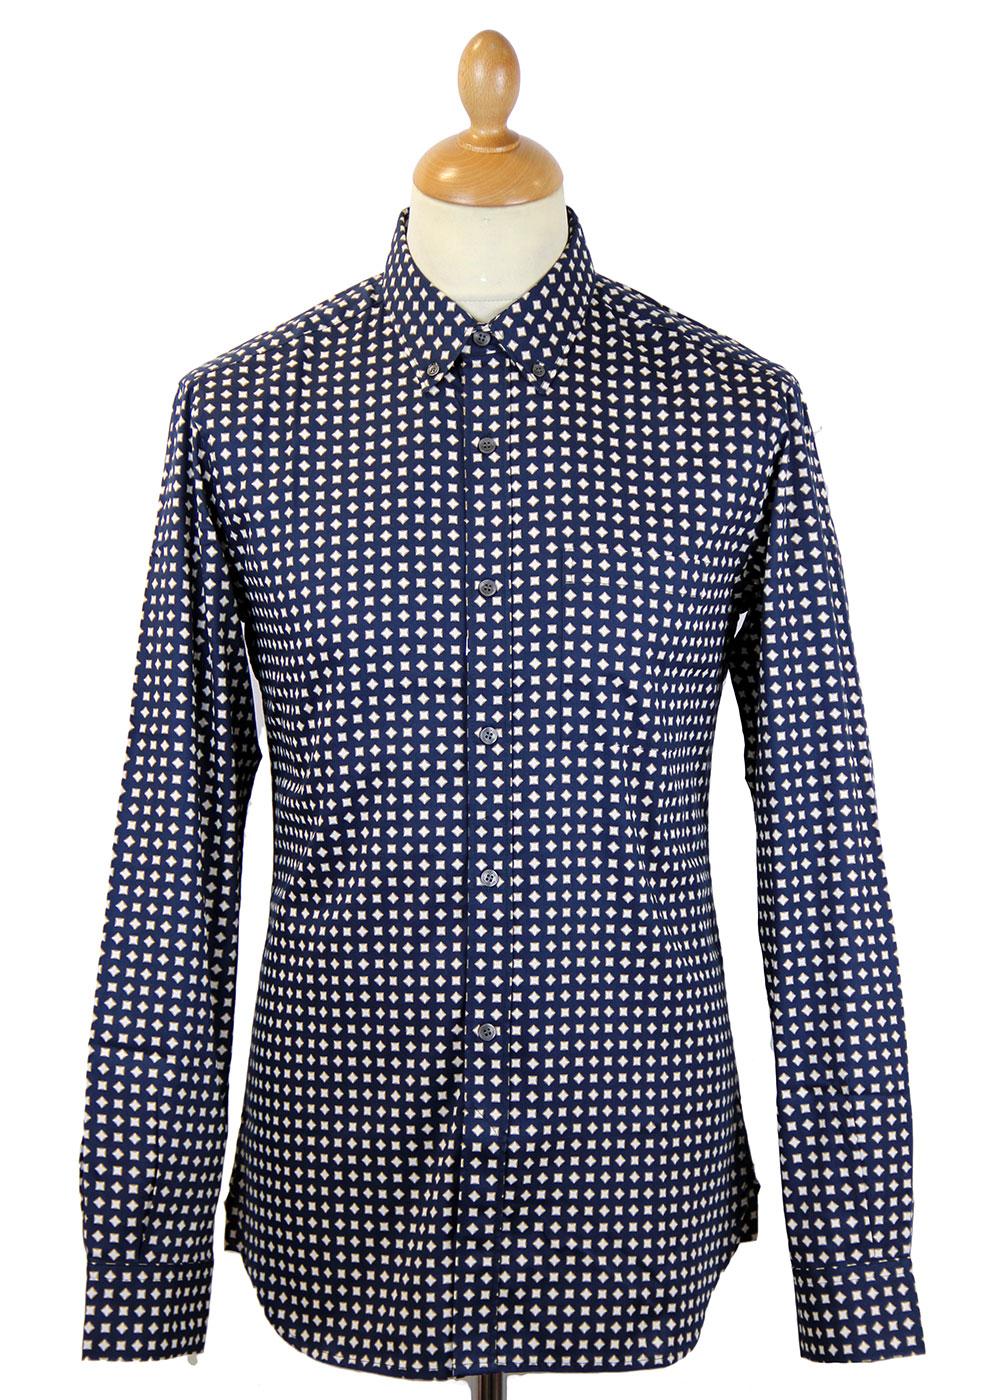 Gallery Diamonds FRENCH CONNECTION 60s Mod Shirt